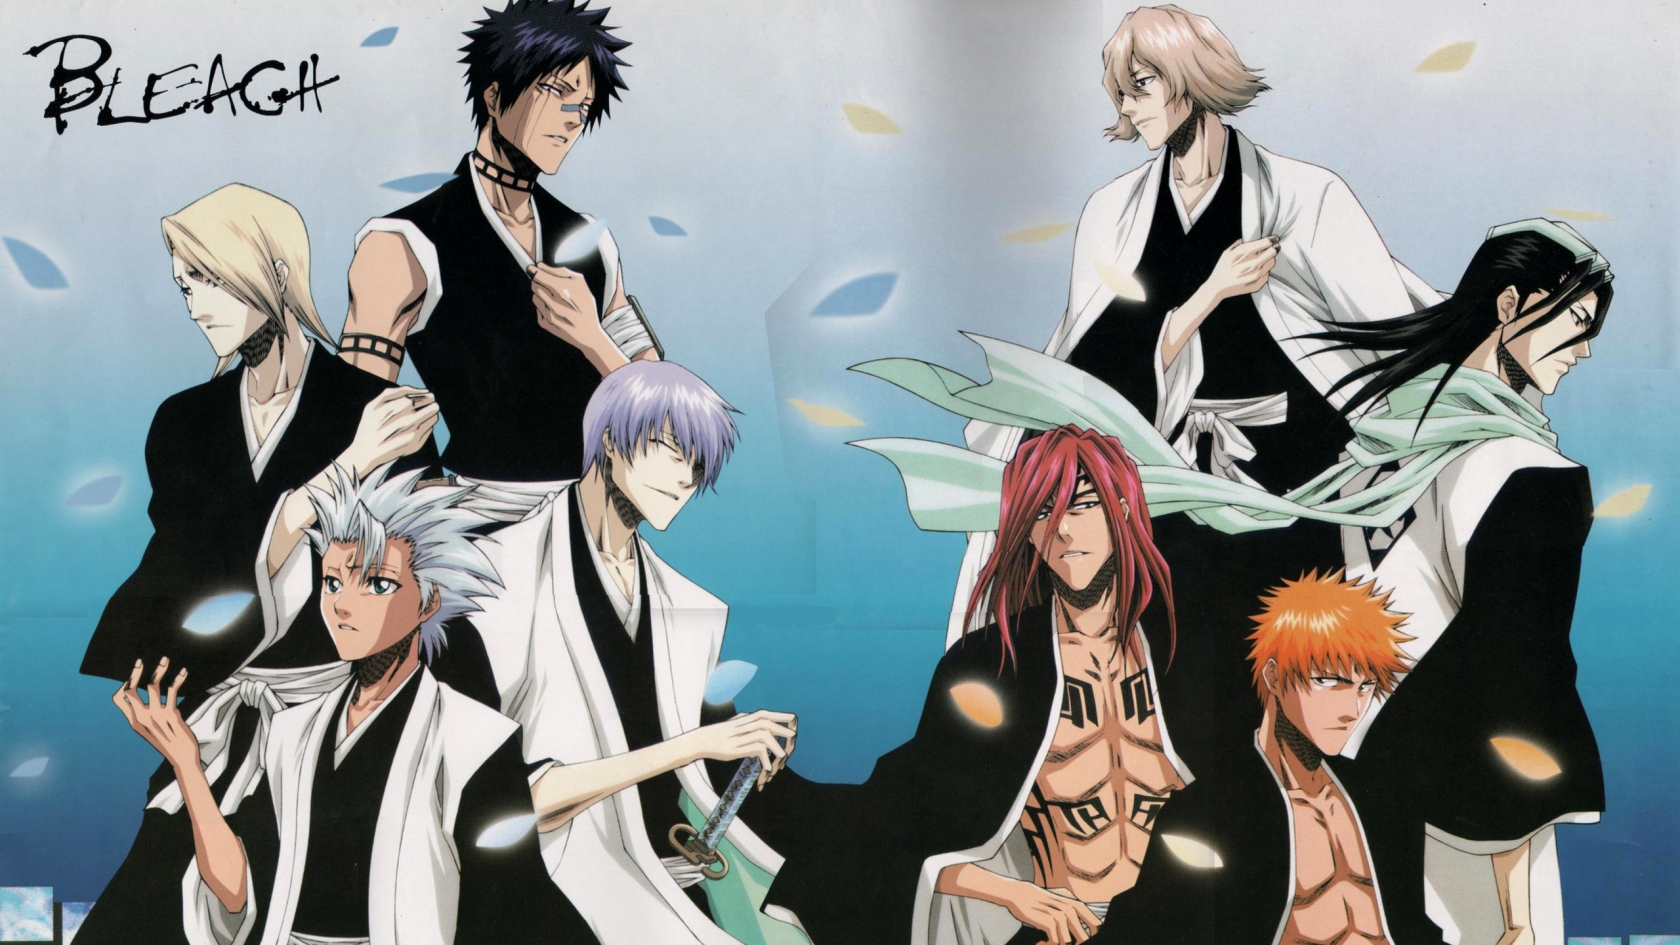 Bleach Anime Characters for 1680 x 945 HDTV resolution